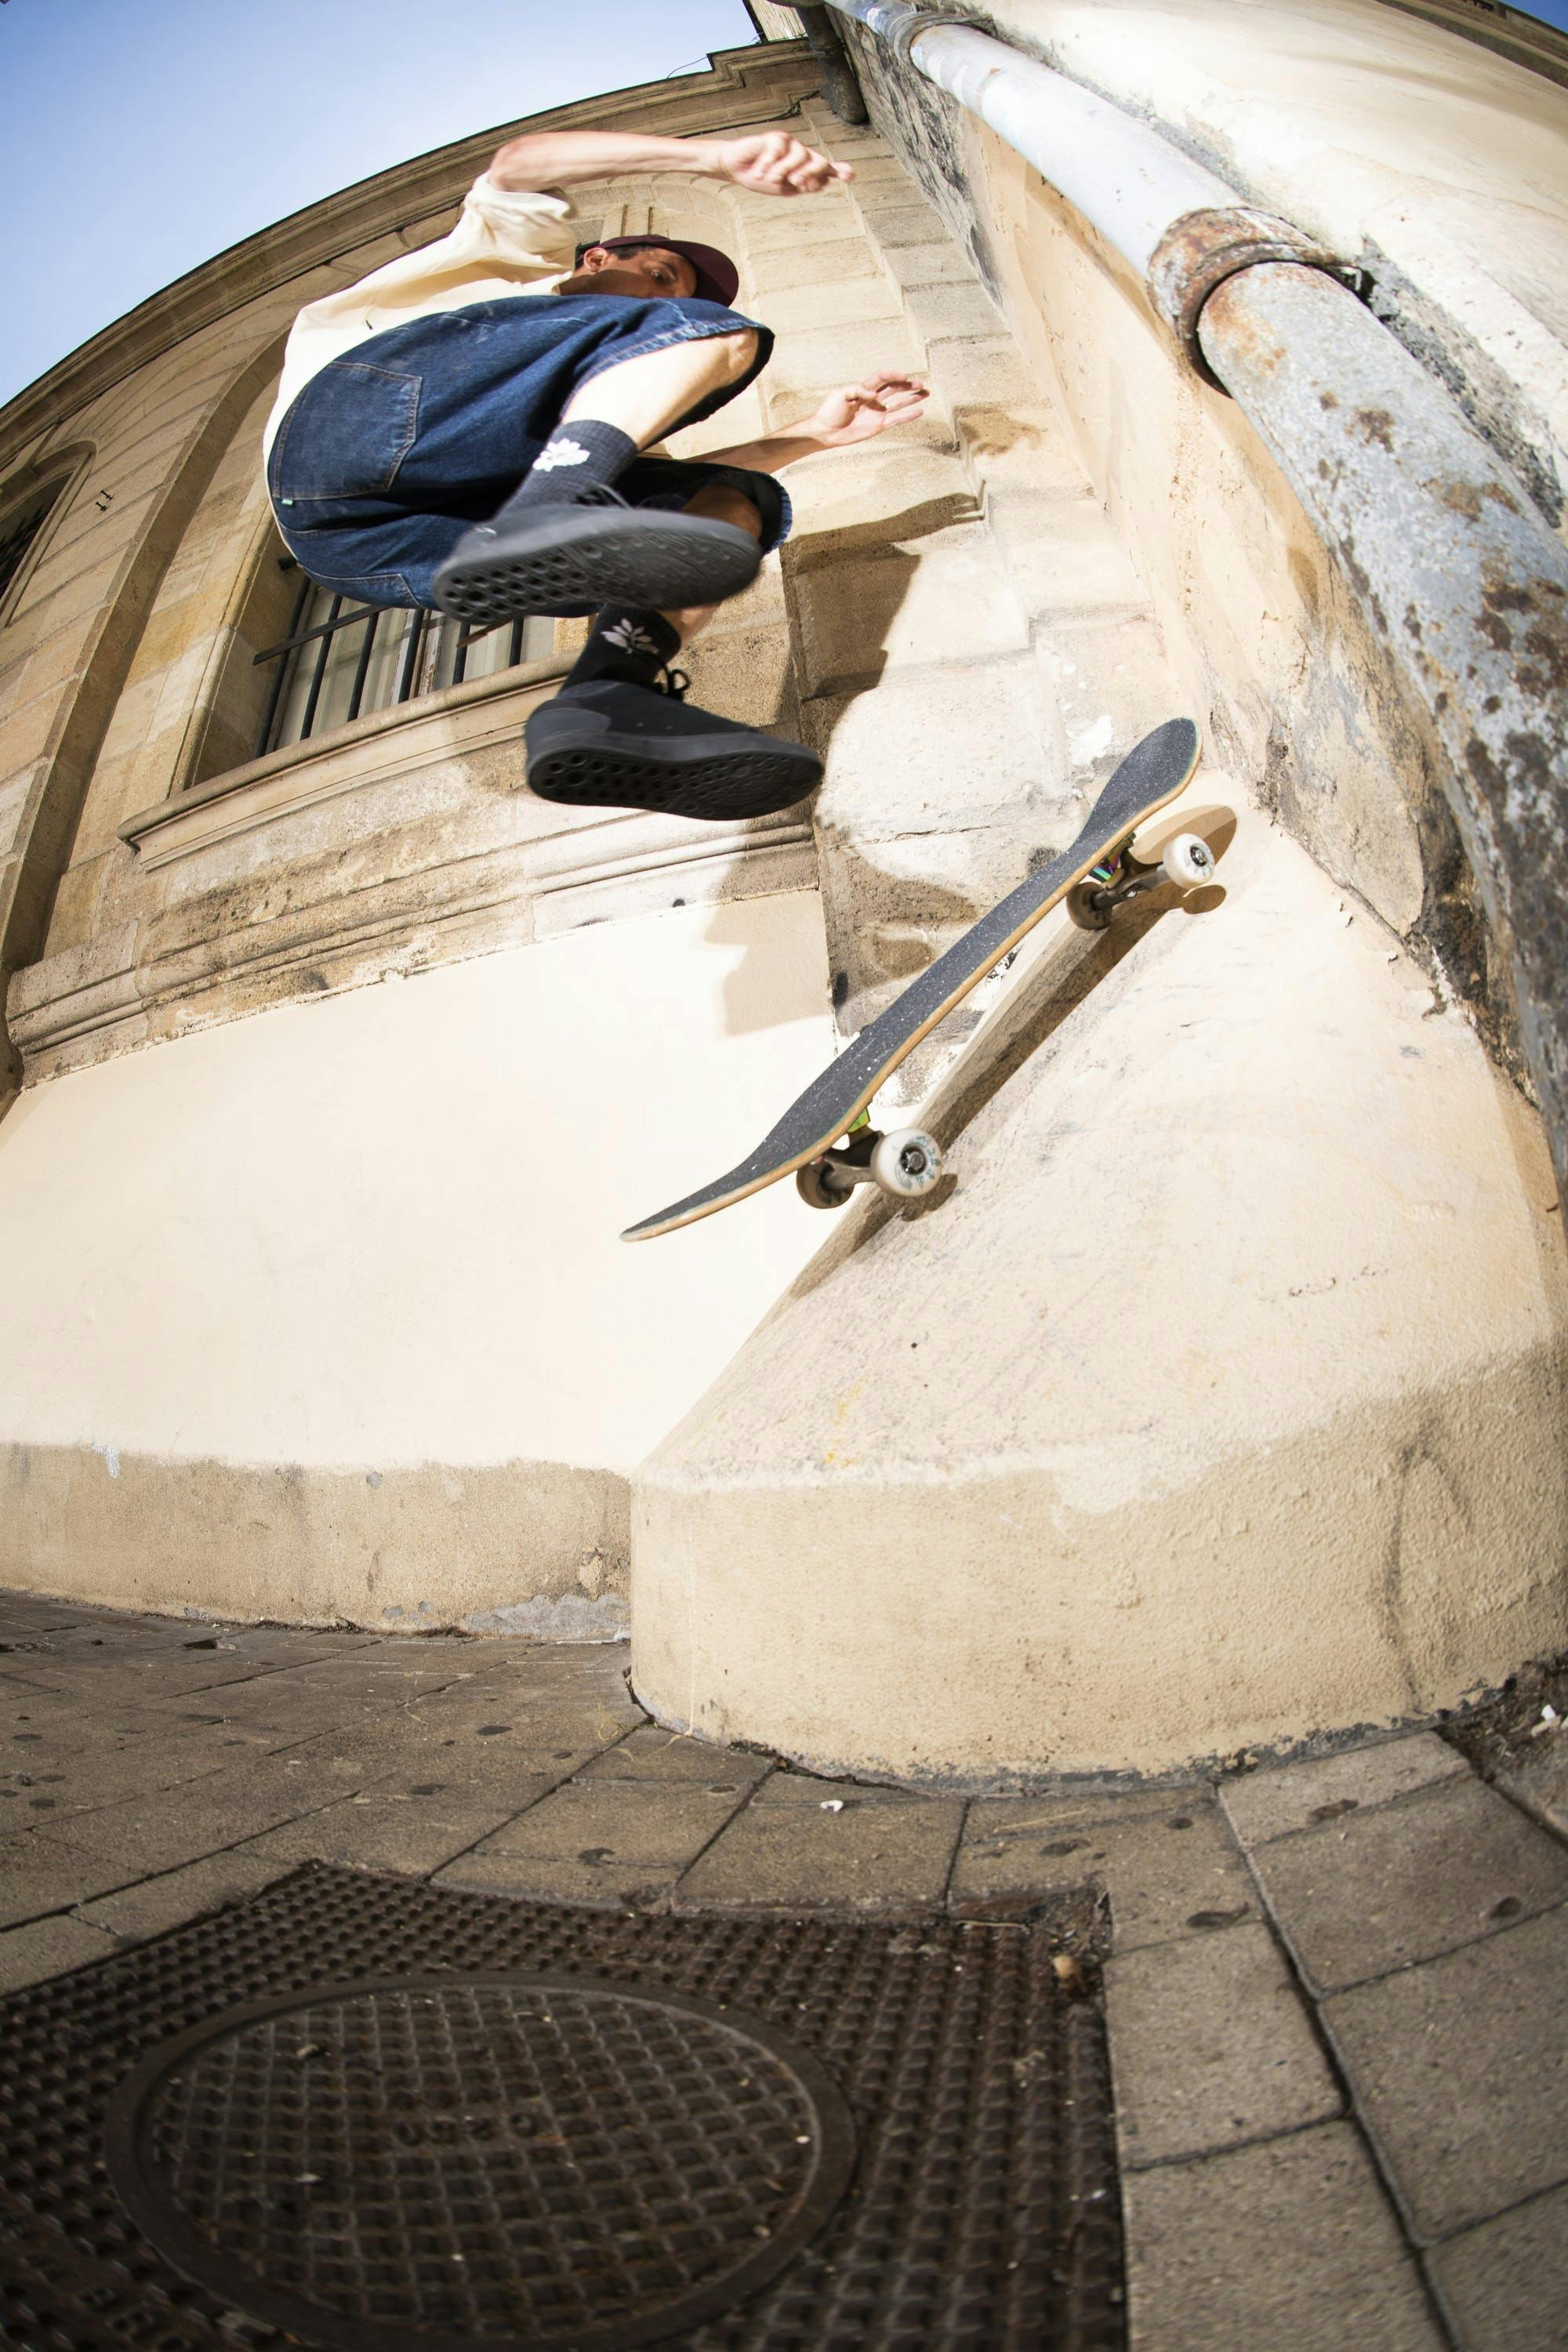 LEO VALLS,  OLLIE UP TO BODY VARIAL/ Small street in downtown Bordeaux. Leo has few options of Pi-pi banks in his brain.